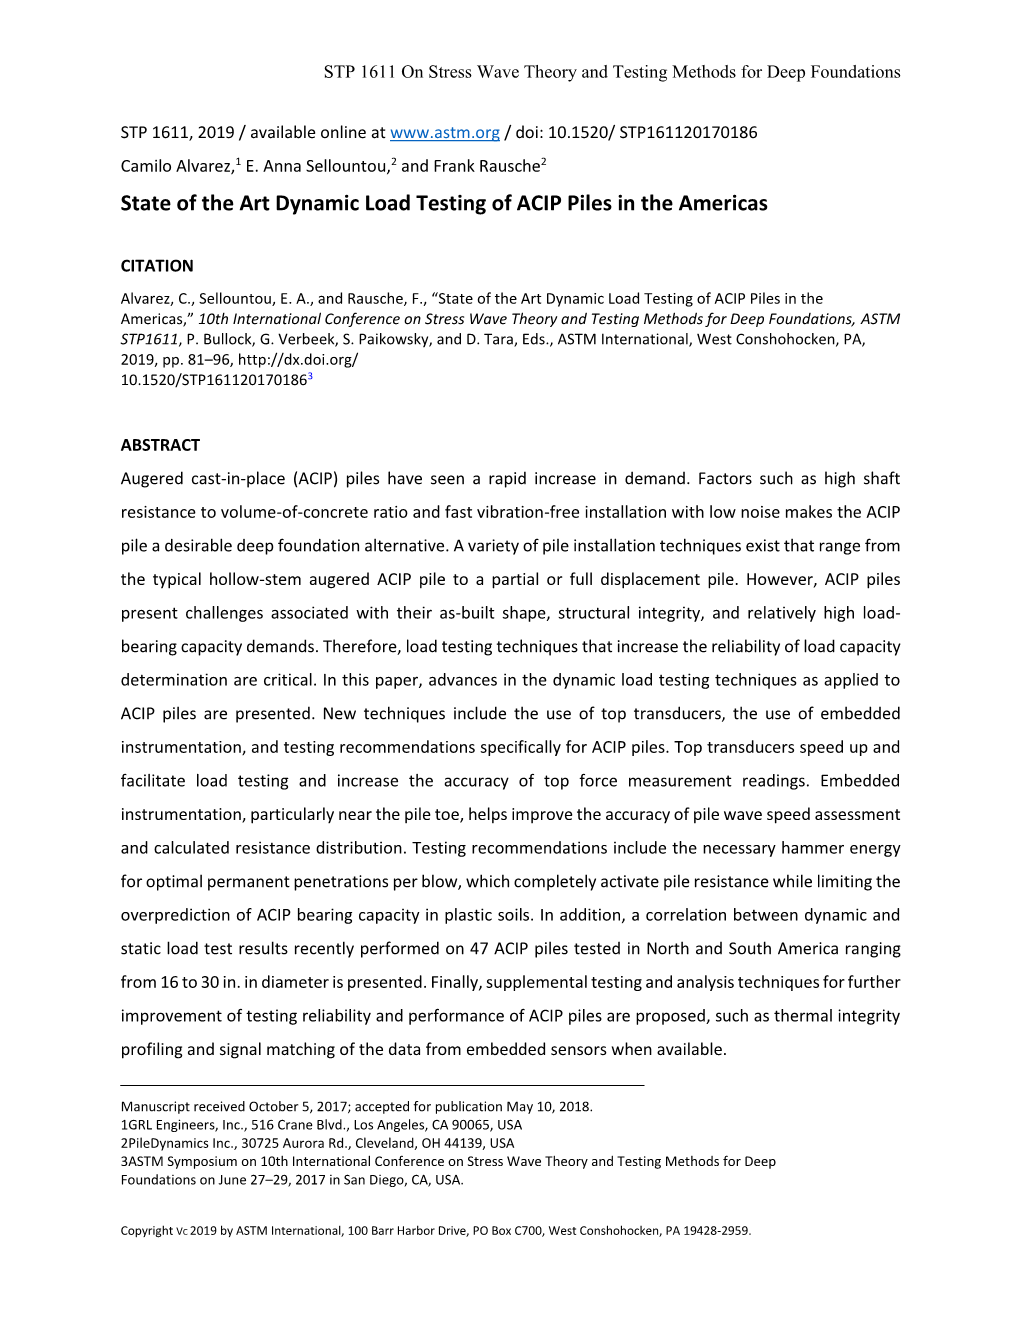 State of the Art Dynamic Load Testing of ACIP Piles in the Americas